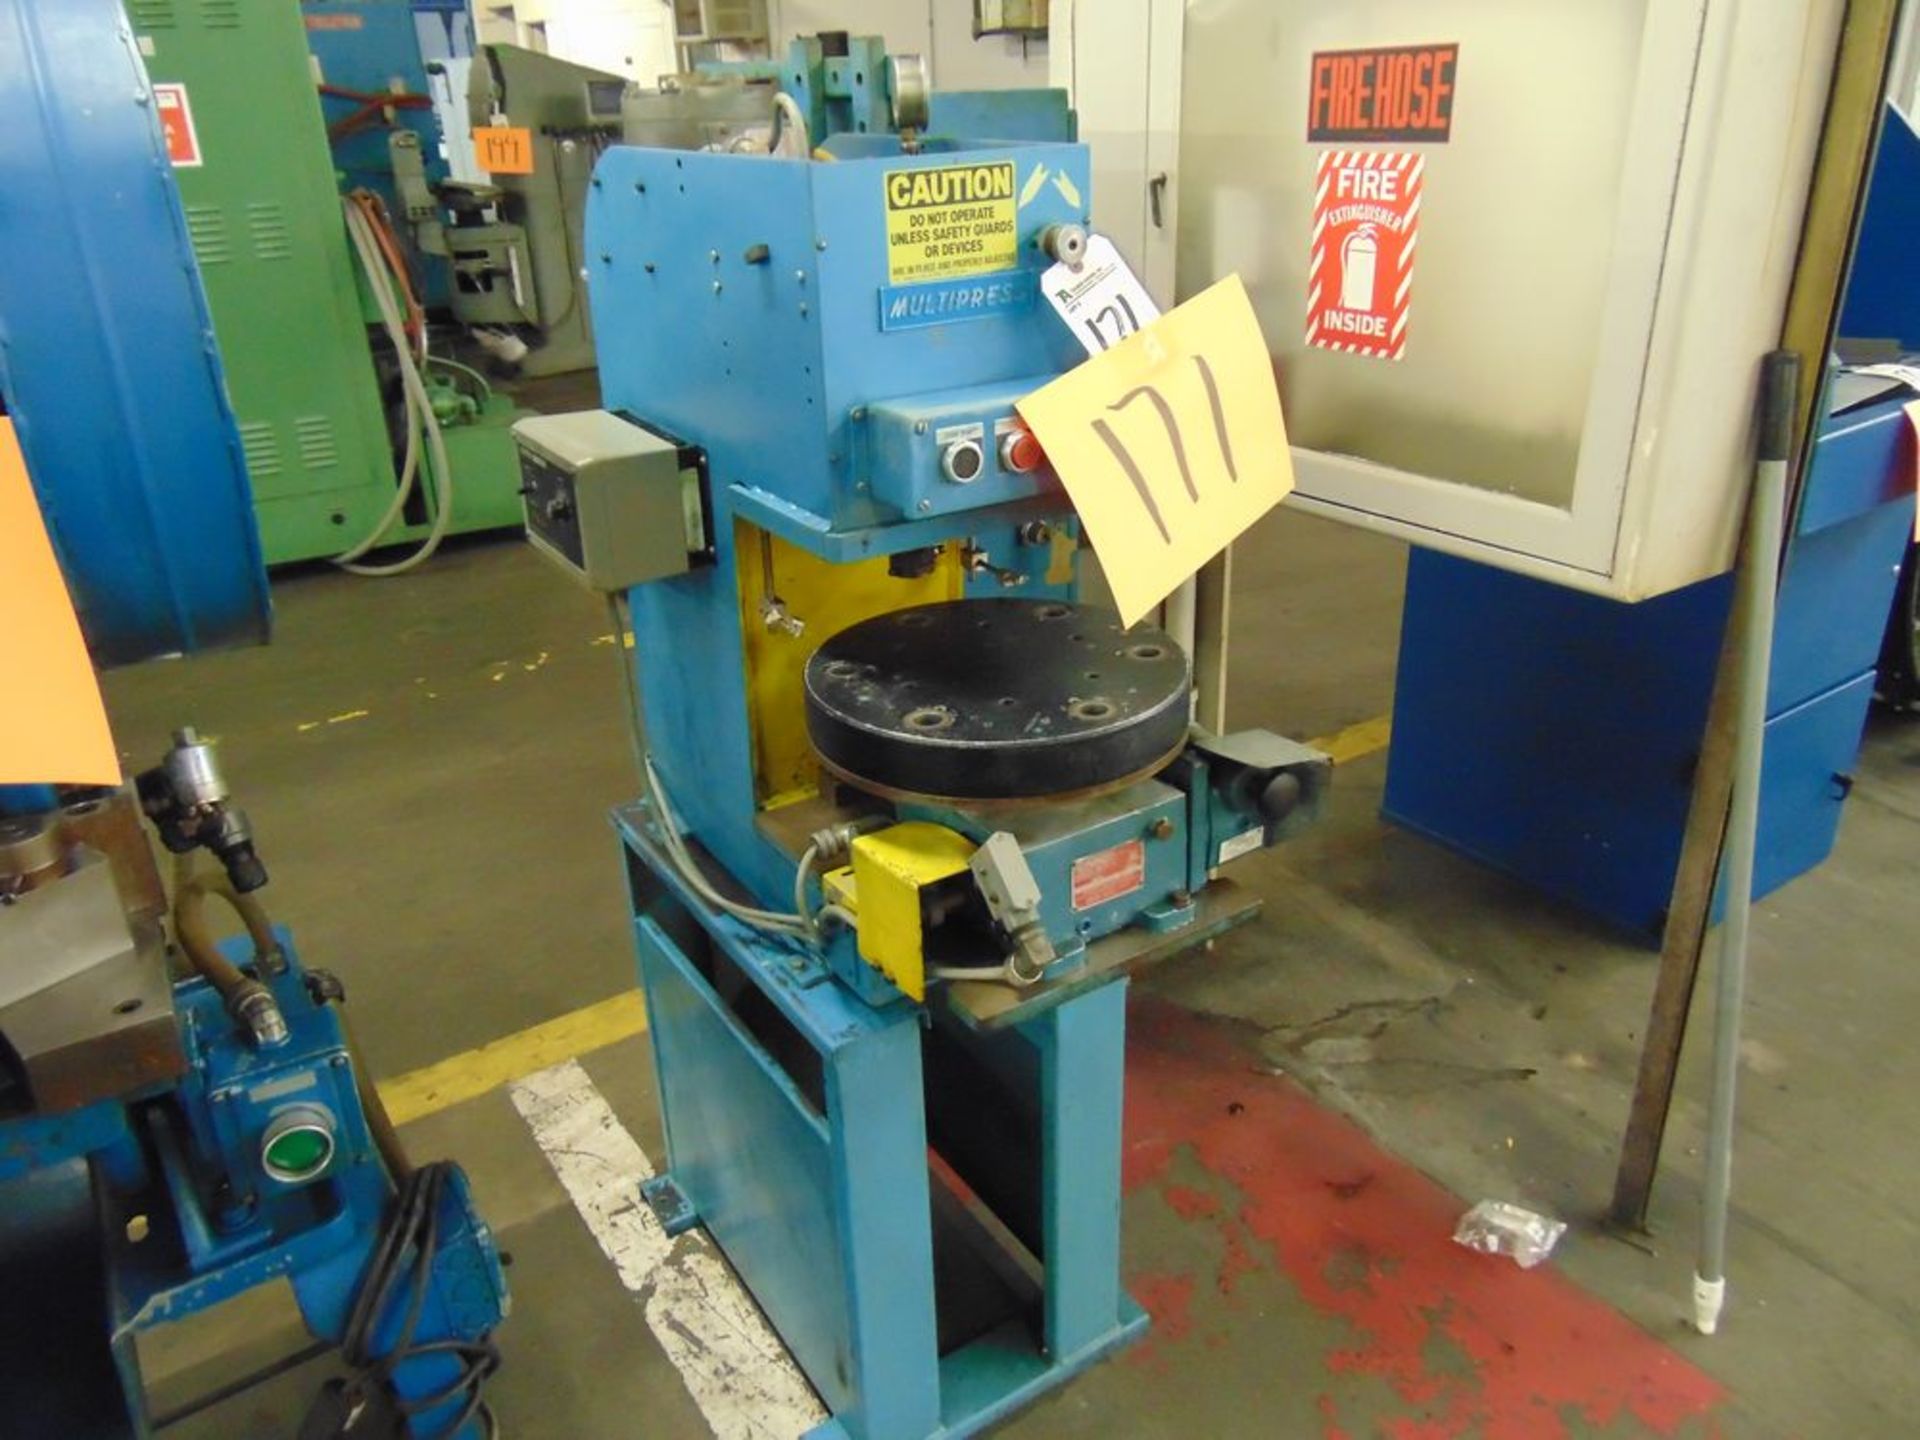 Multipress 'C' Frame Hyd. Press w/ Indexer (LOADING FEES: $80)